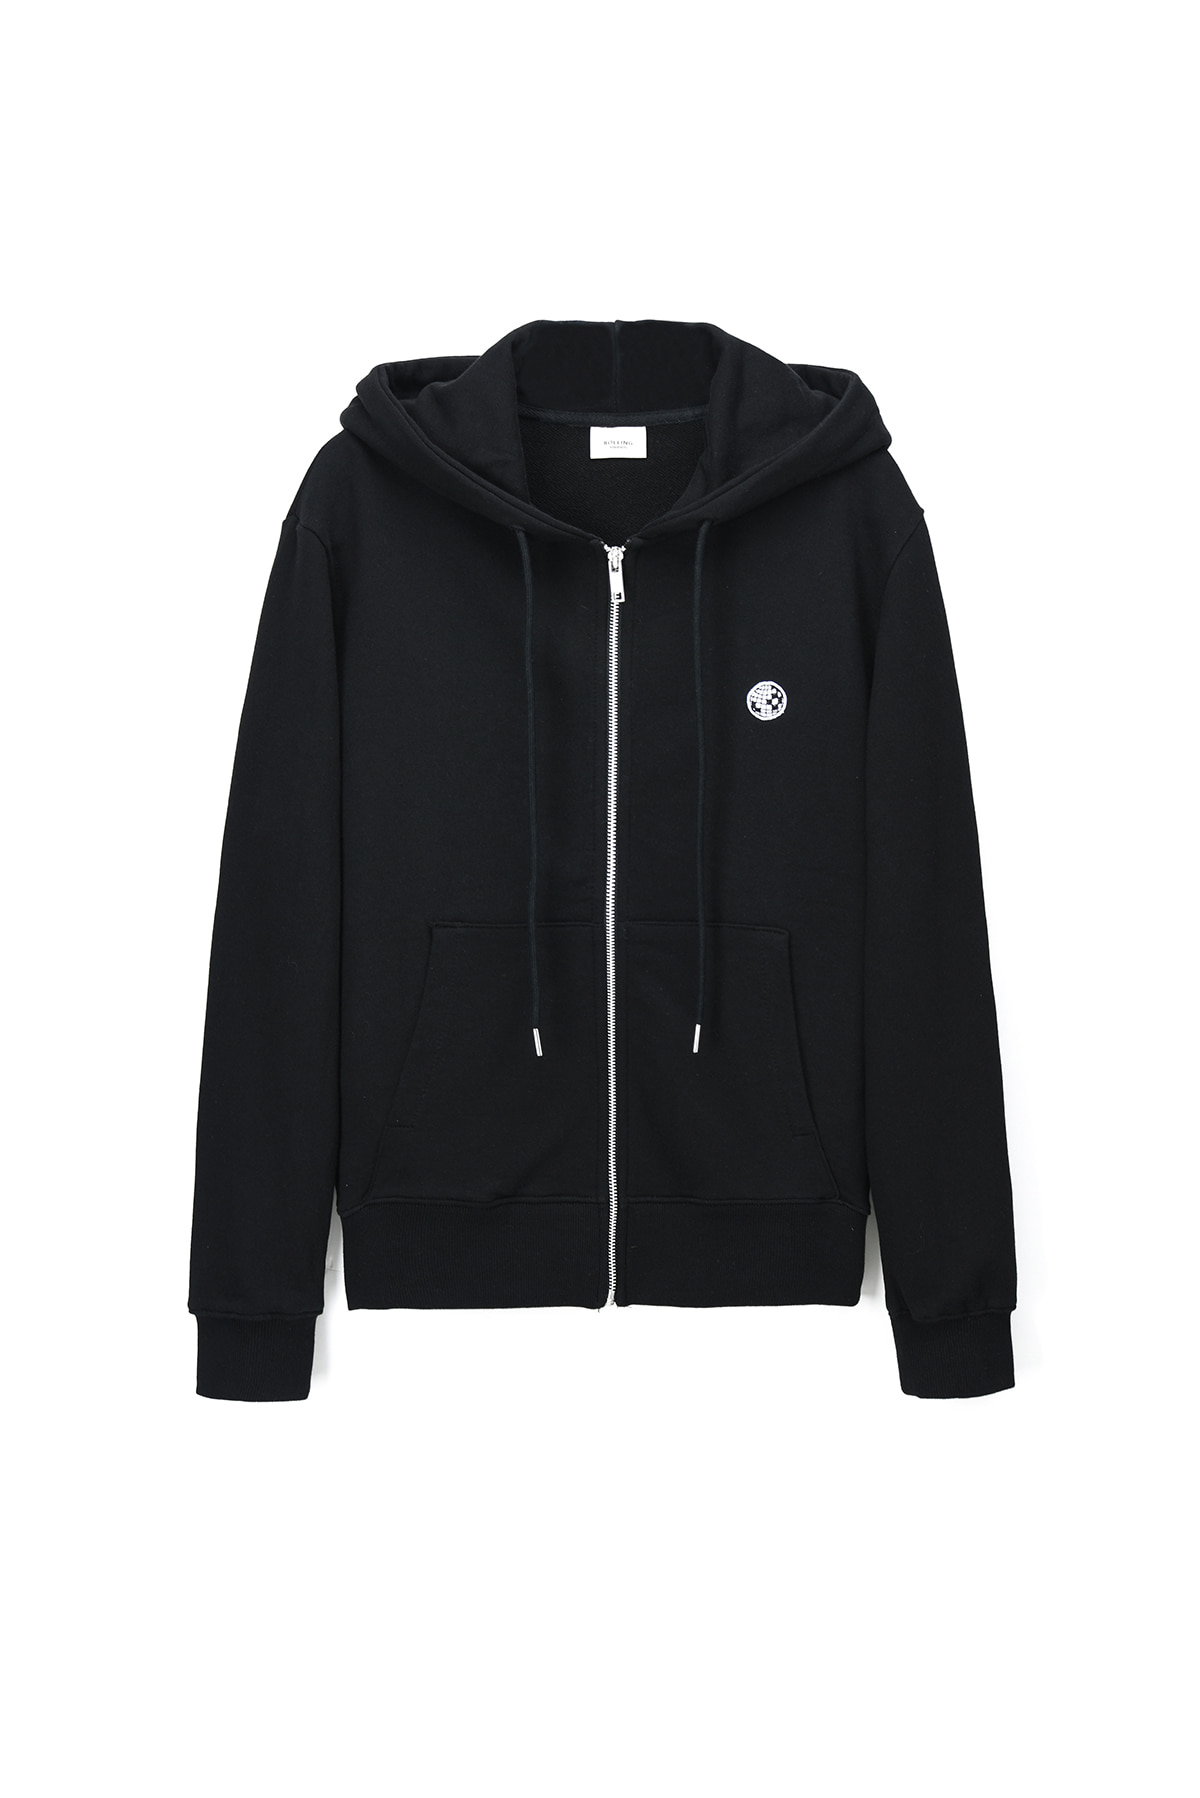 MIRRORBALL EMBROIDERED ROLLING FLOCKED ZIPPED HOODIE BLACK